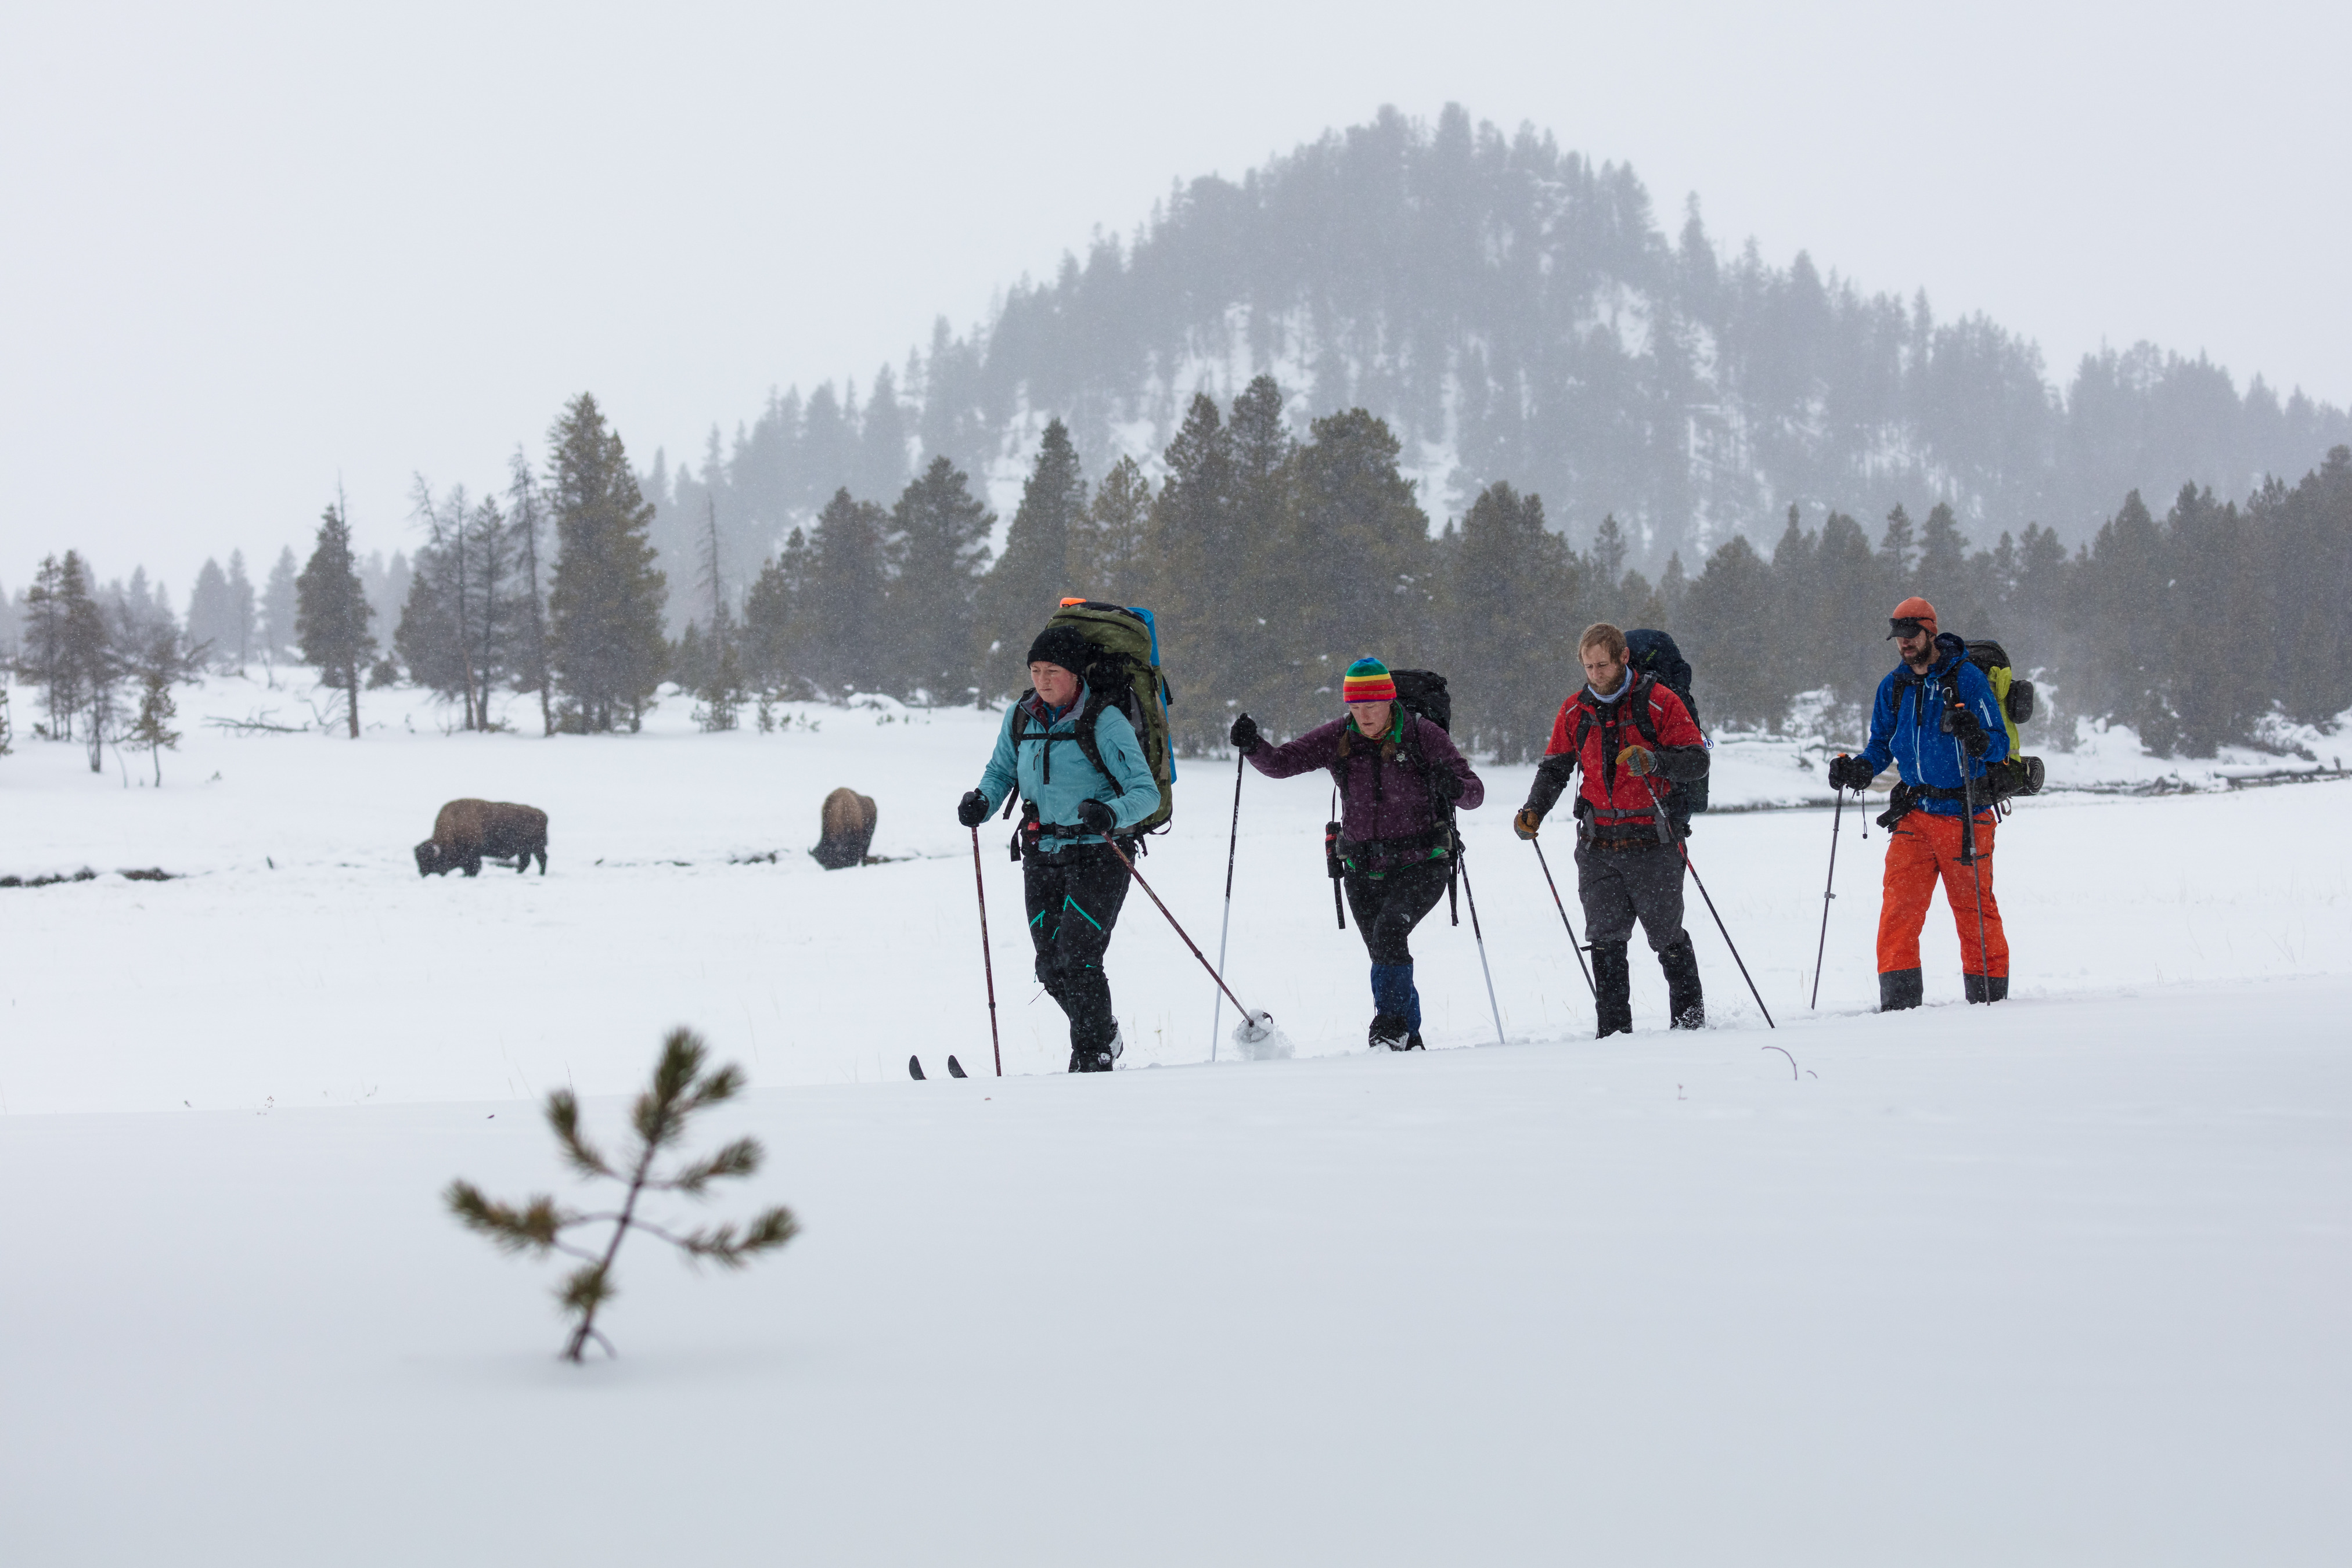 Four cross-country skiers with backpacks on ski in line across snow covered flats with two bison in the background